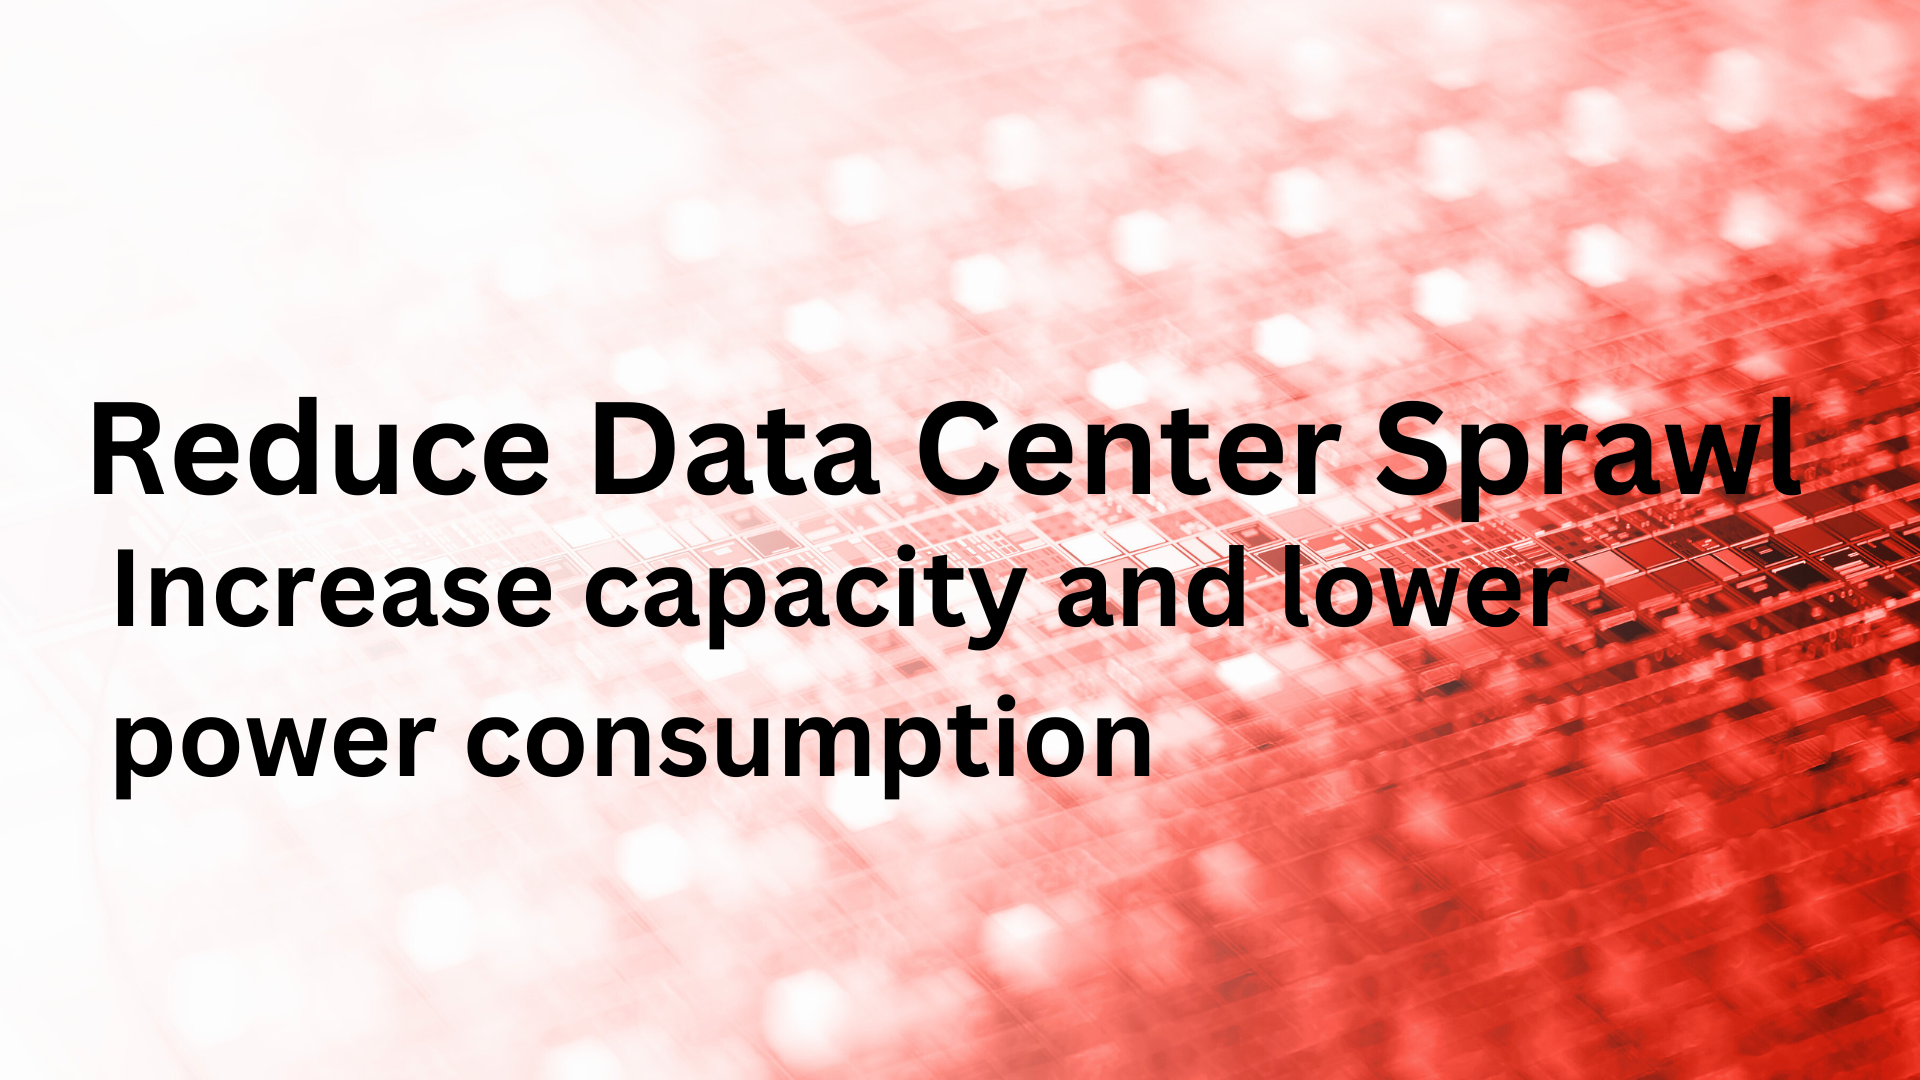 Reduce Data Center Sprawl: Increase capacity and lower power consumption 